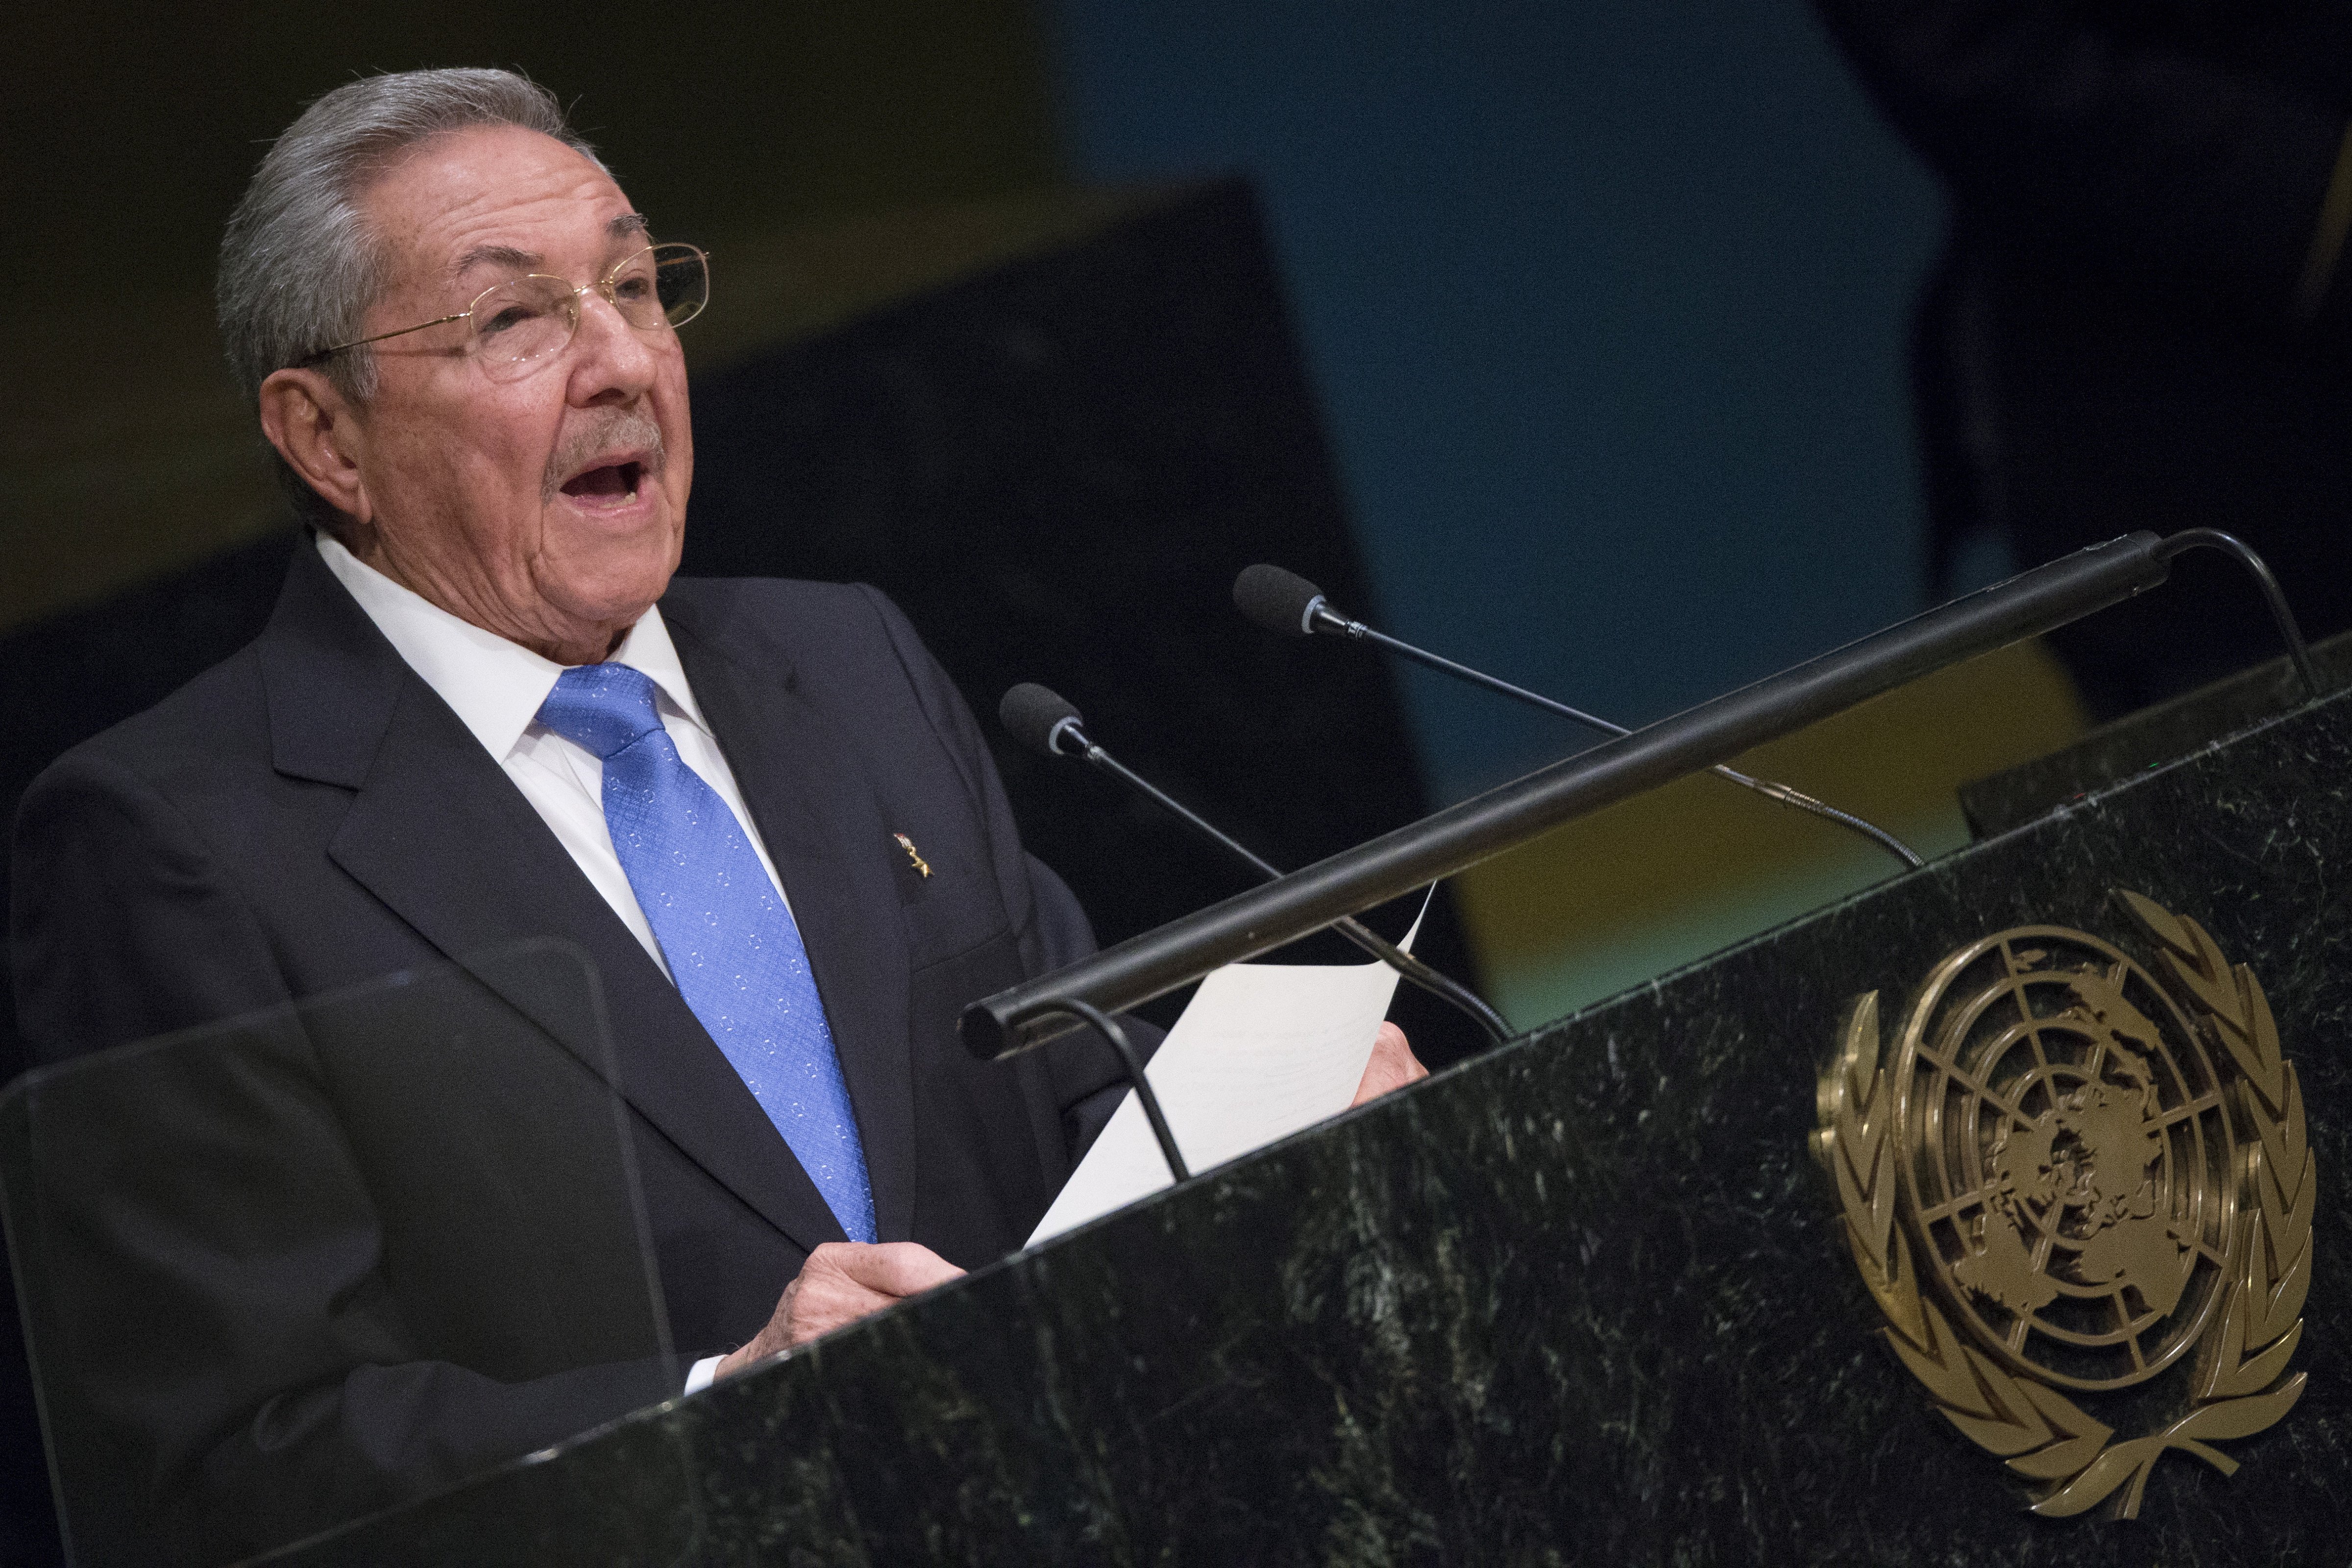 Cuban President Castro addresses attendees during the 70th session of the United Nations General Assembly in New York